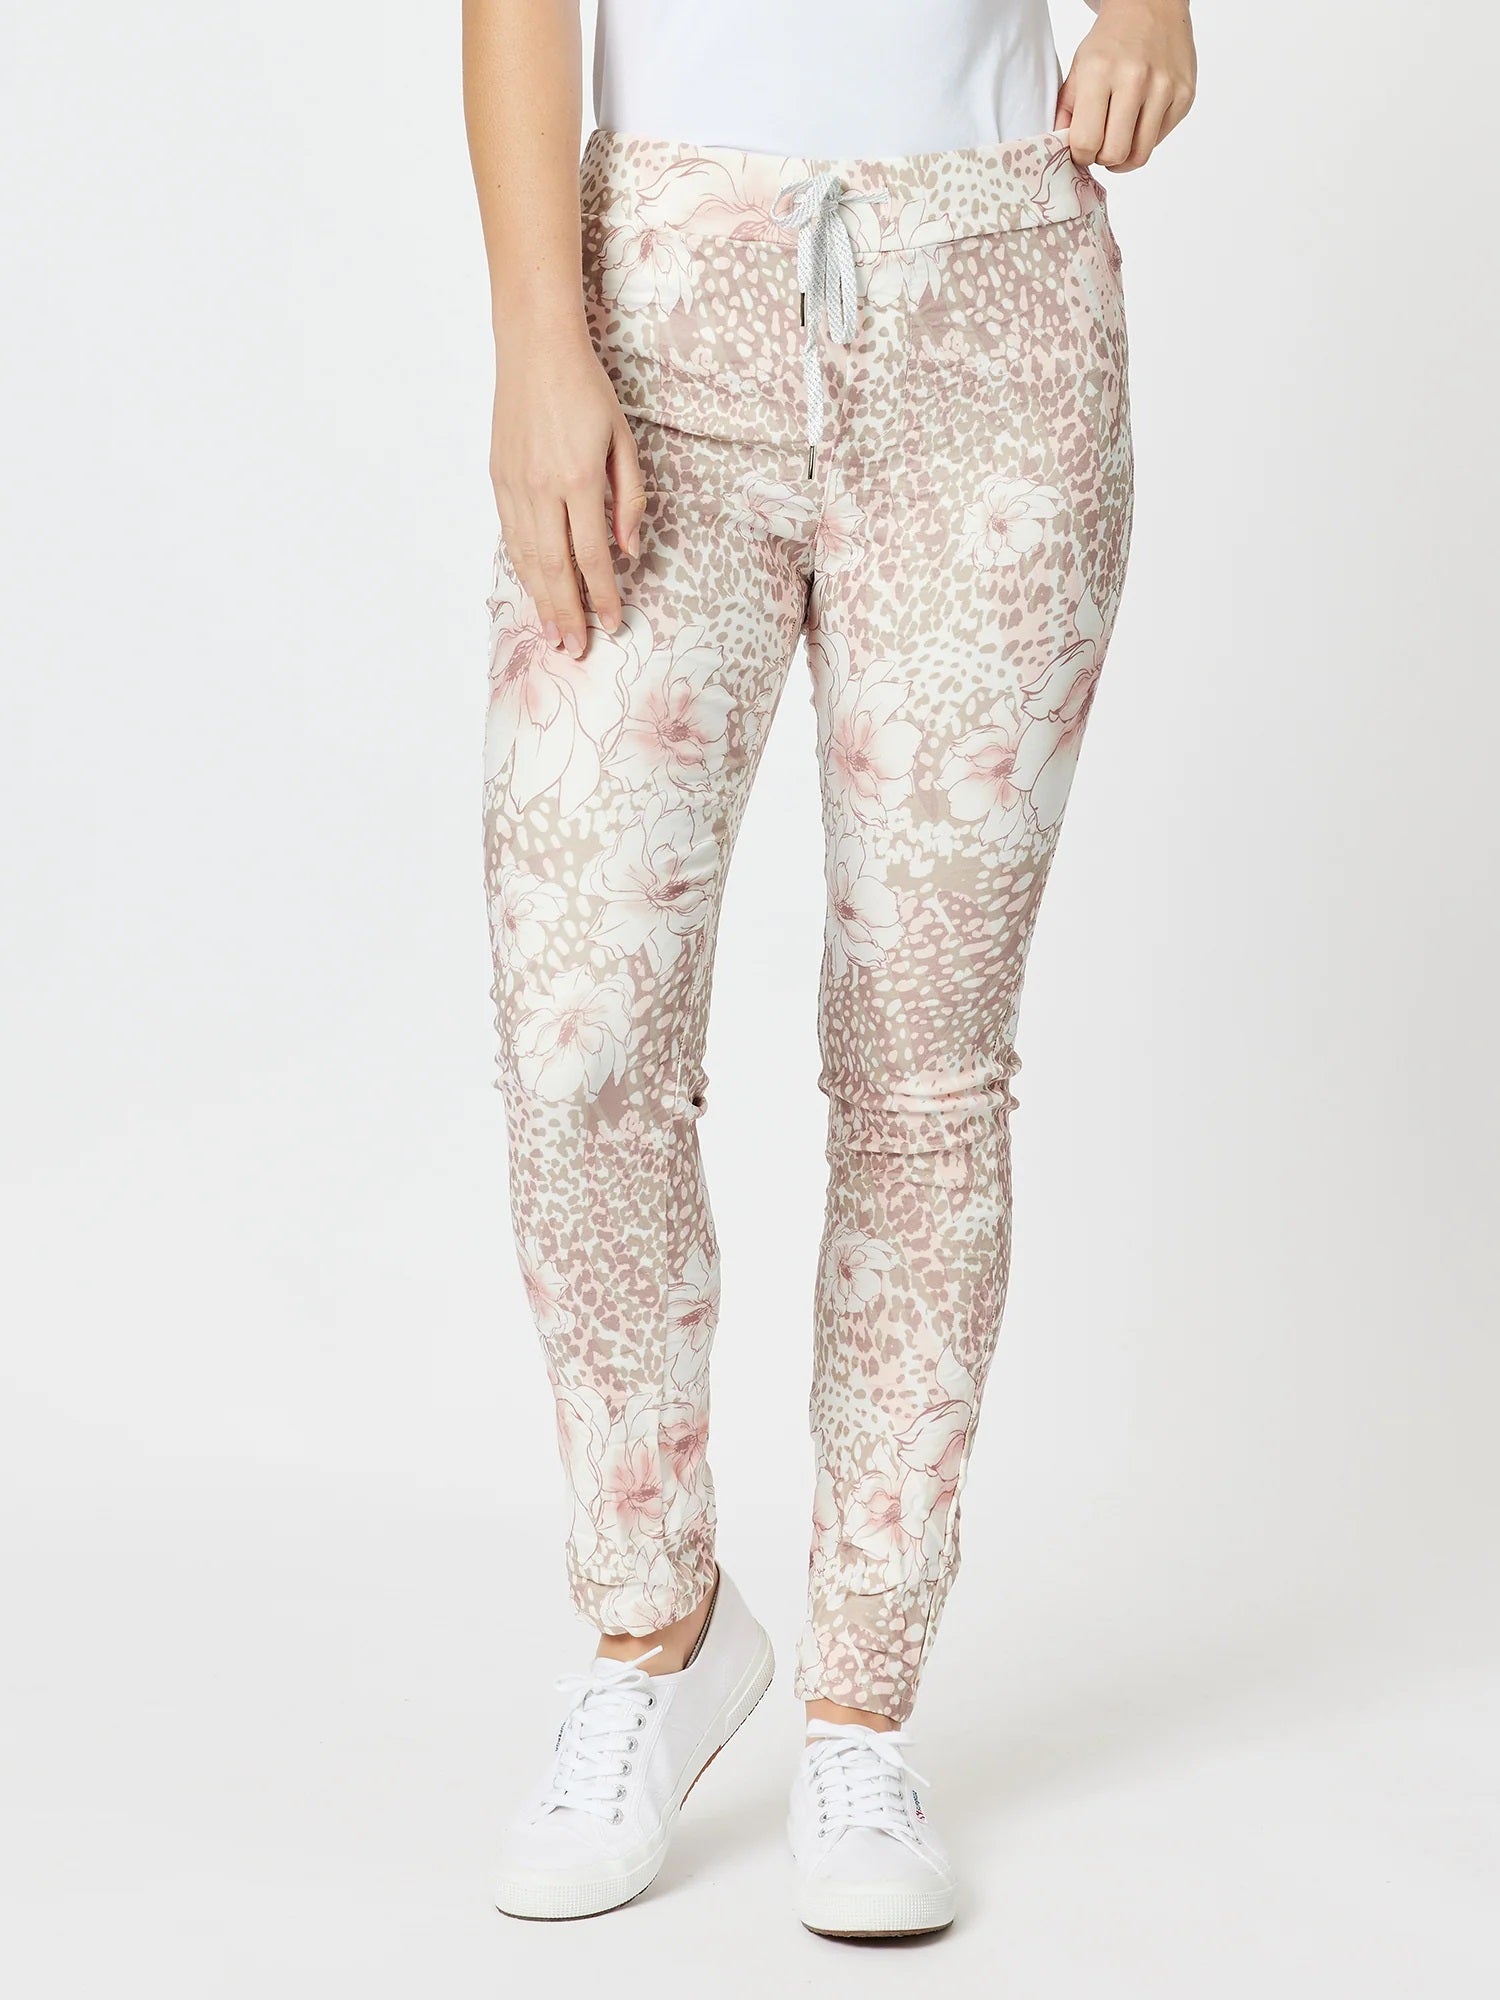 Crushed Flower Jean